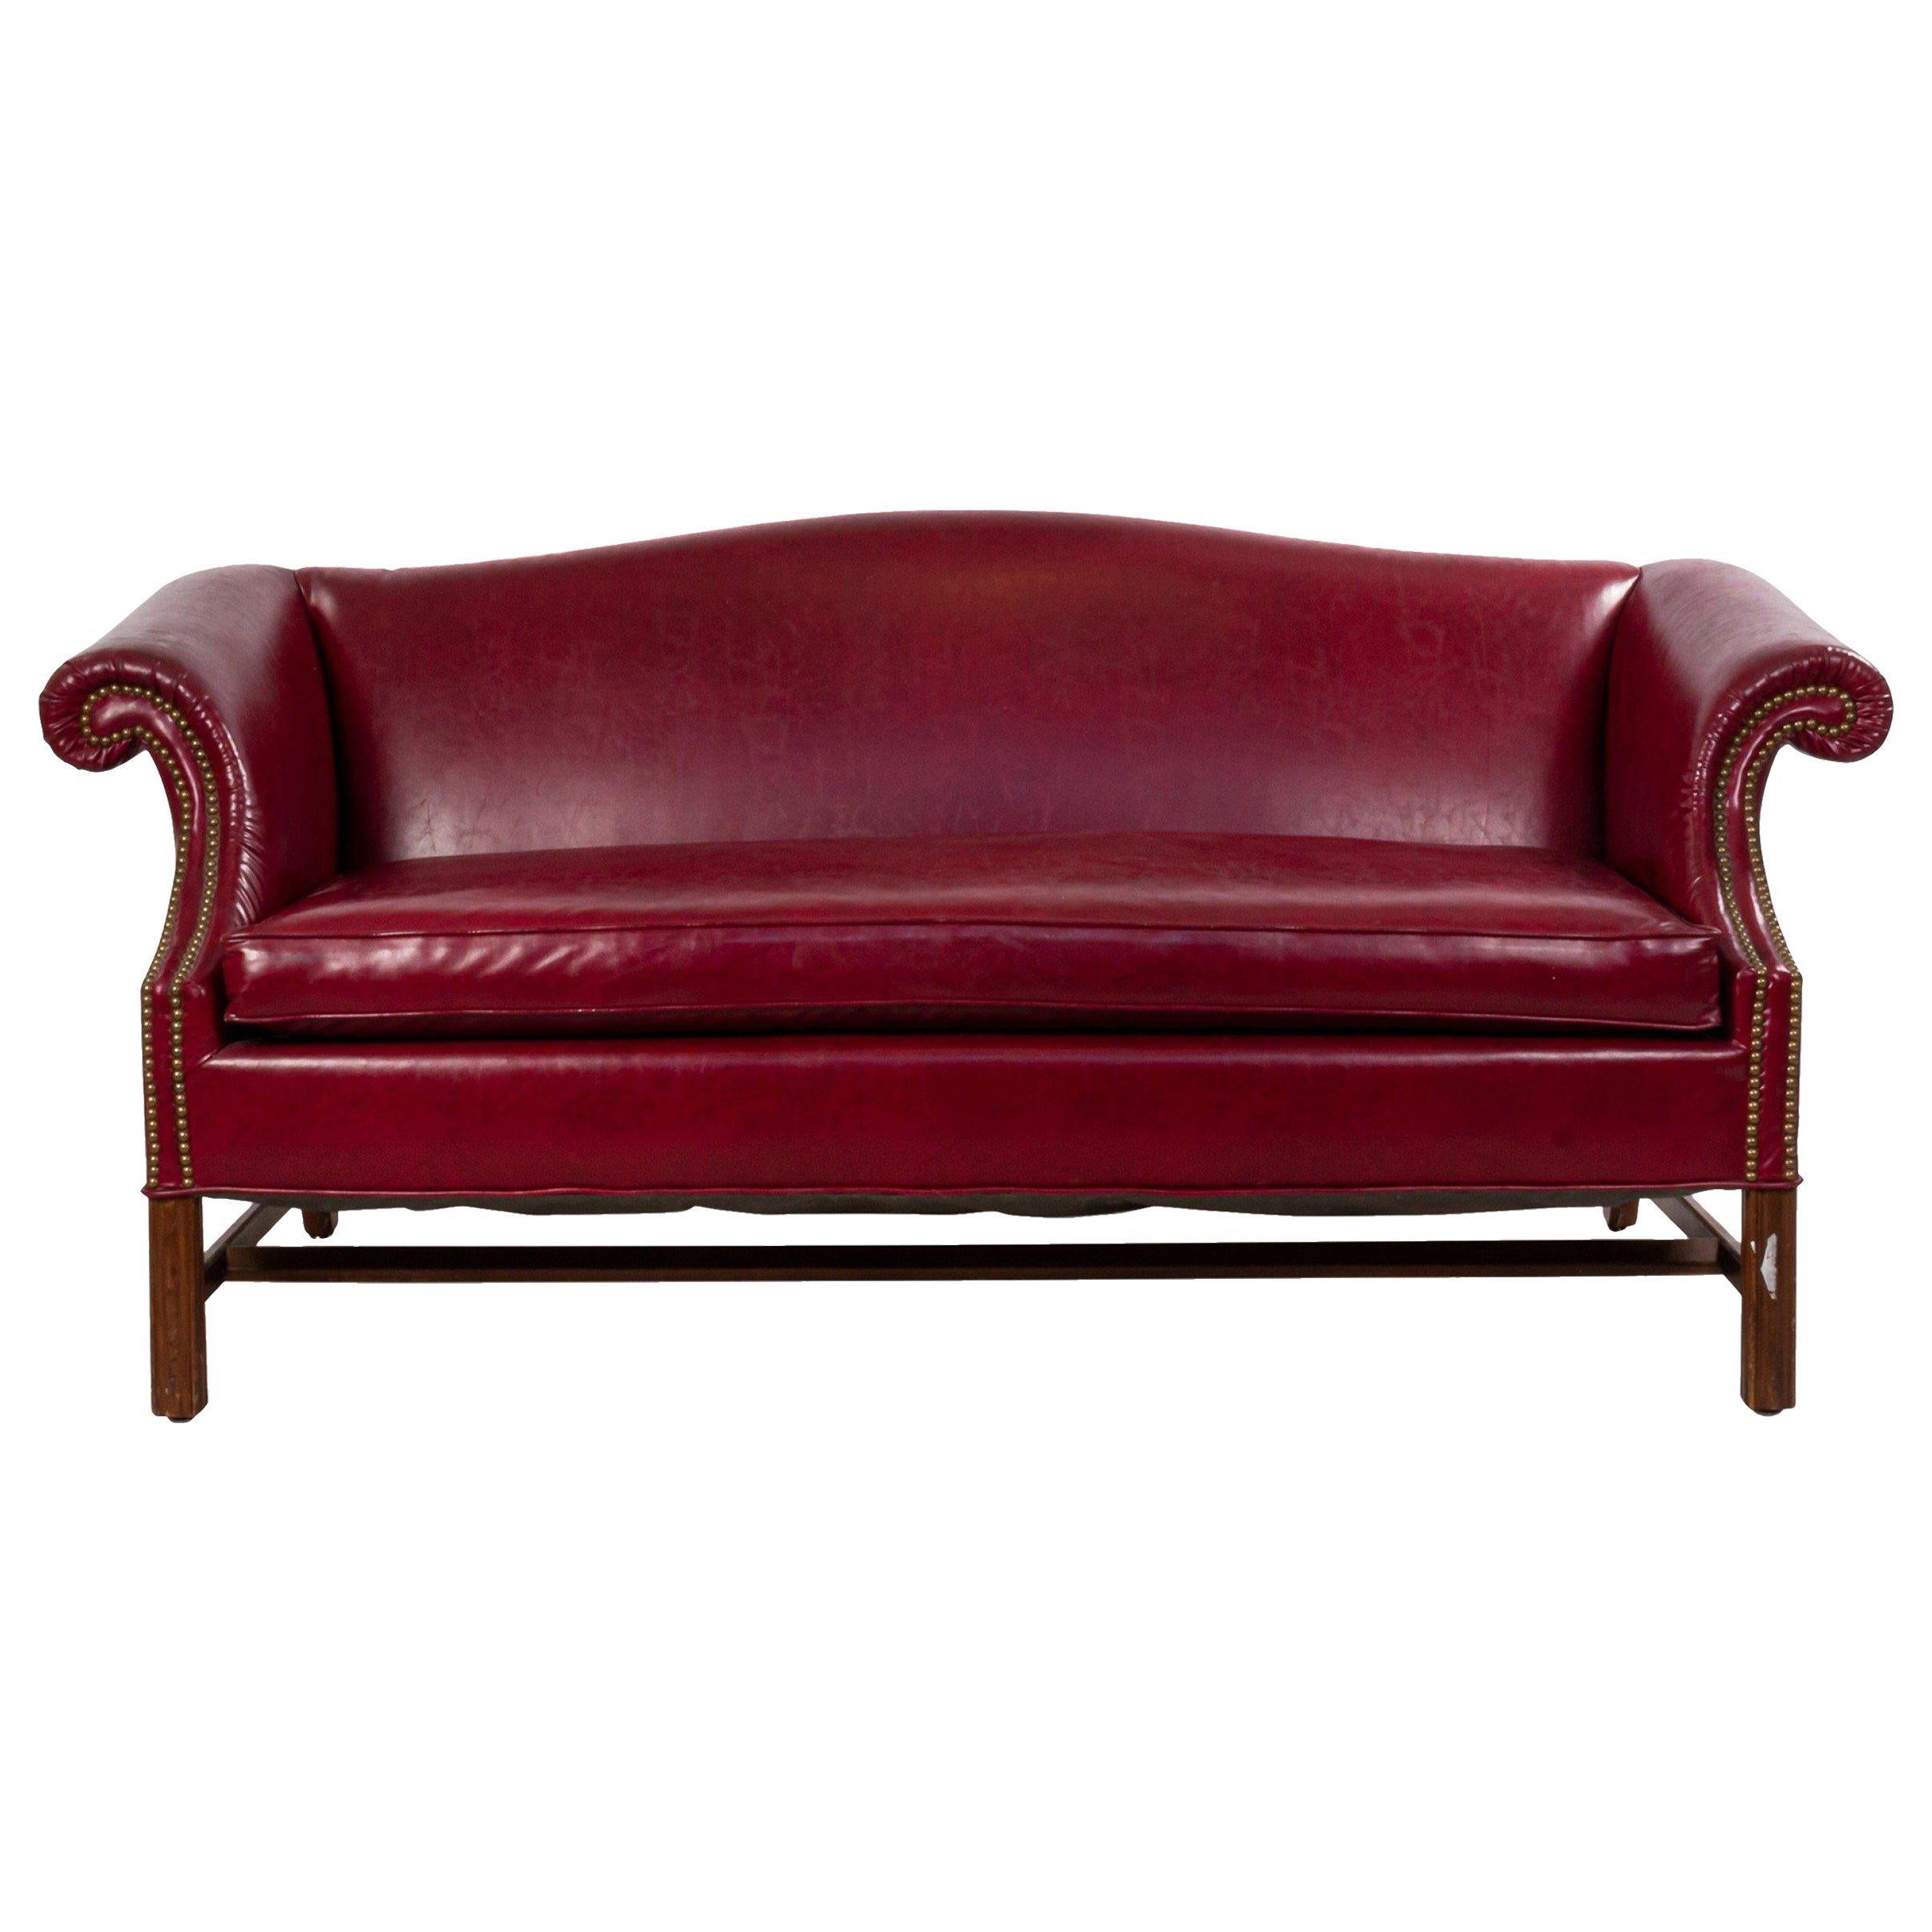 Dark Red Leather Sofa with Upholstery Stud Detail For Sale